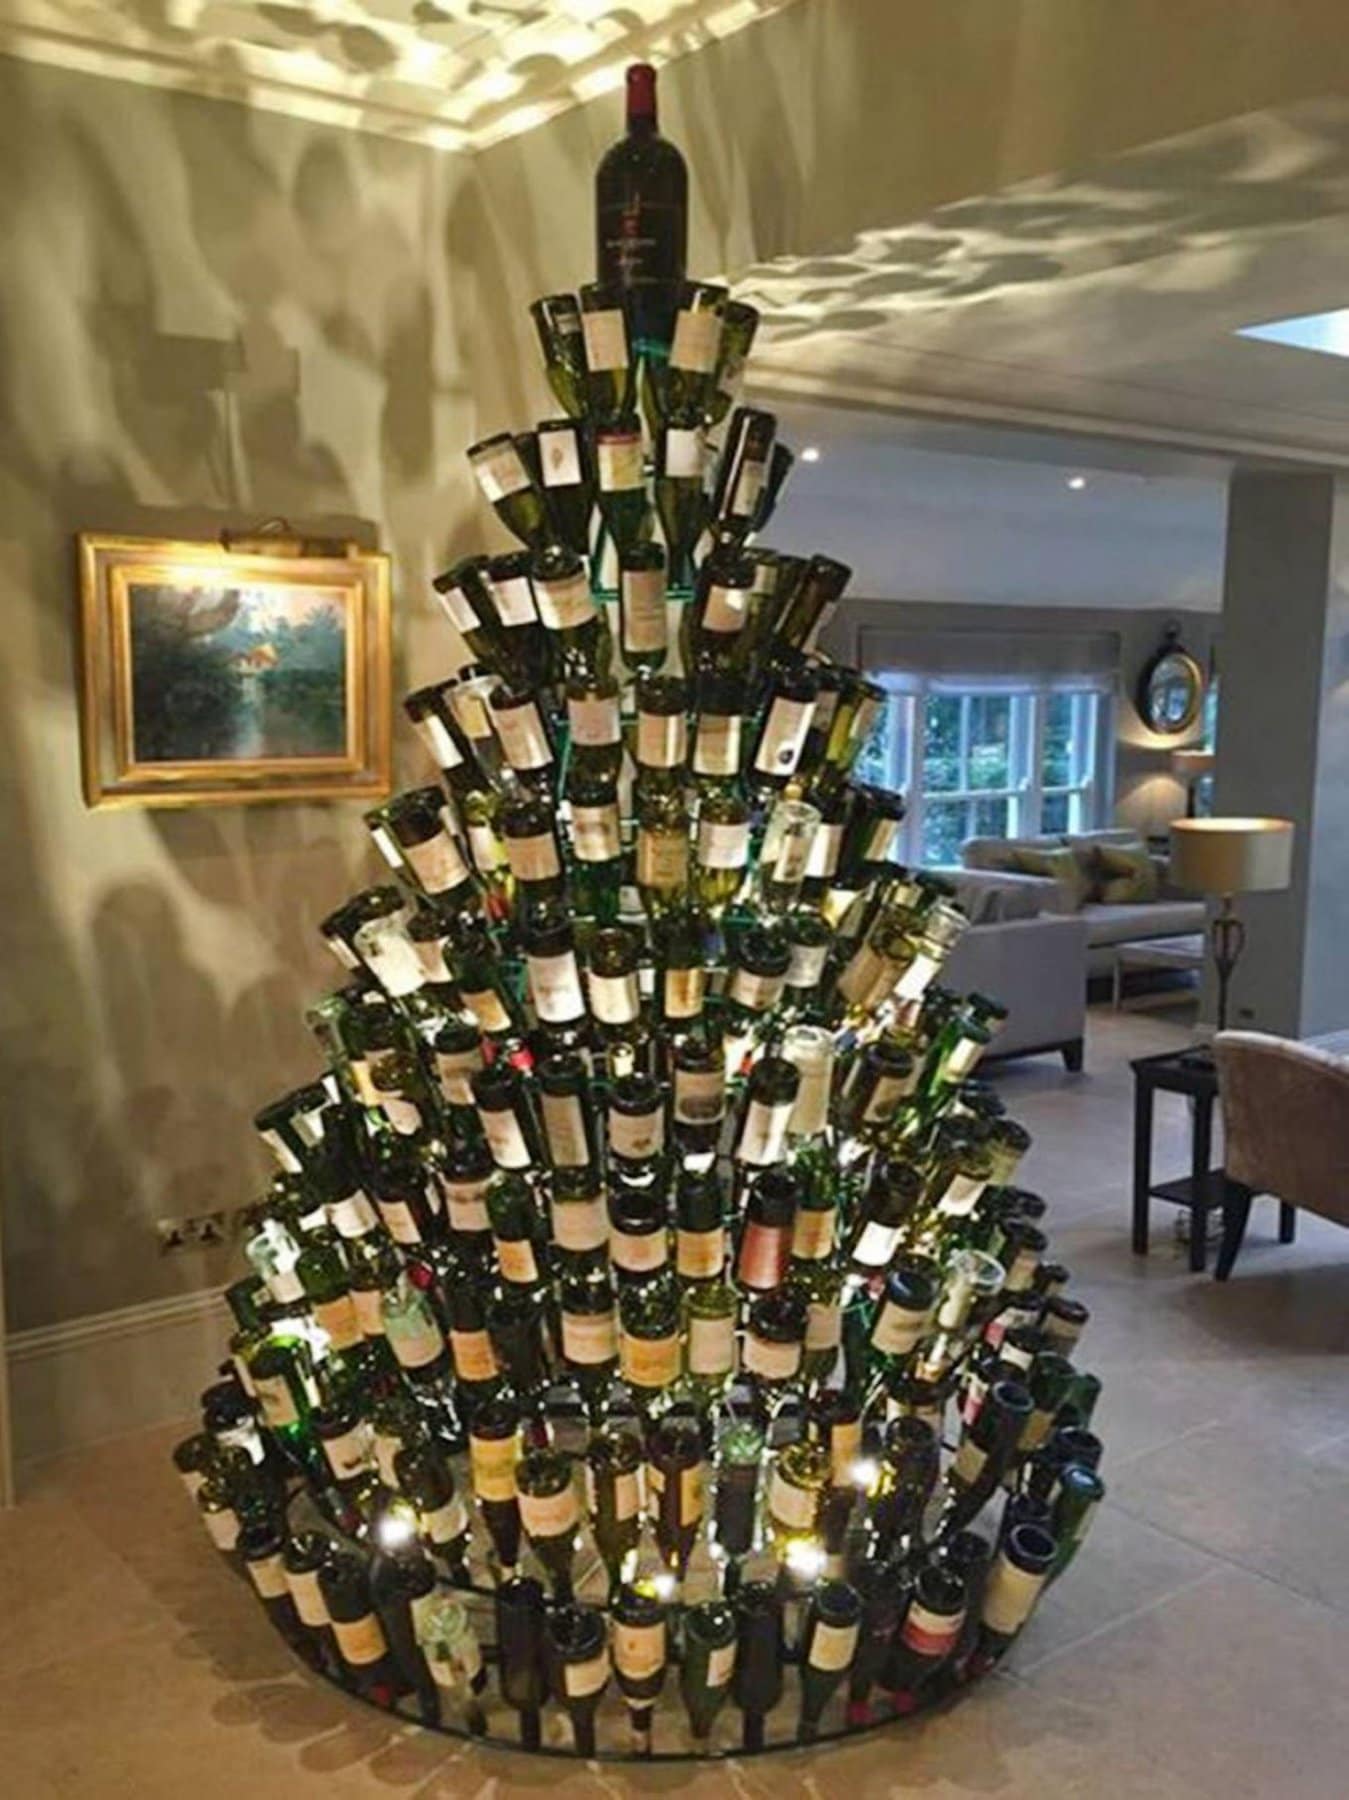 Wine Bottle Christmas Tree...these are the most Creative Tree Ideas!